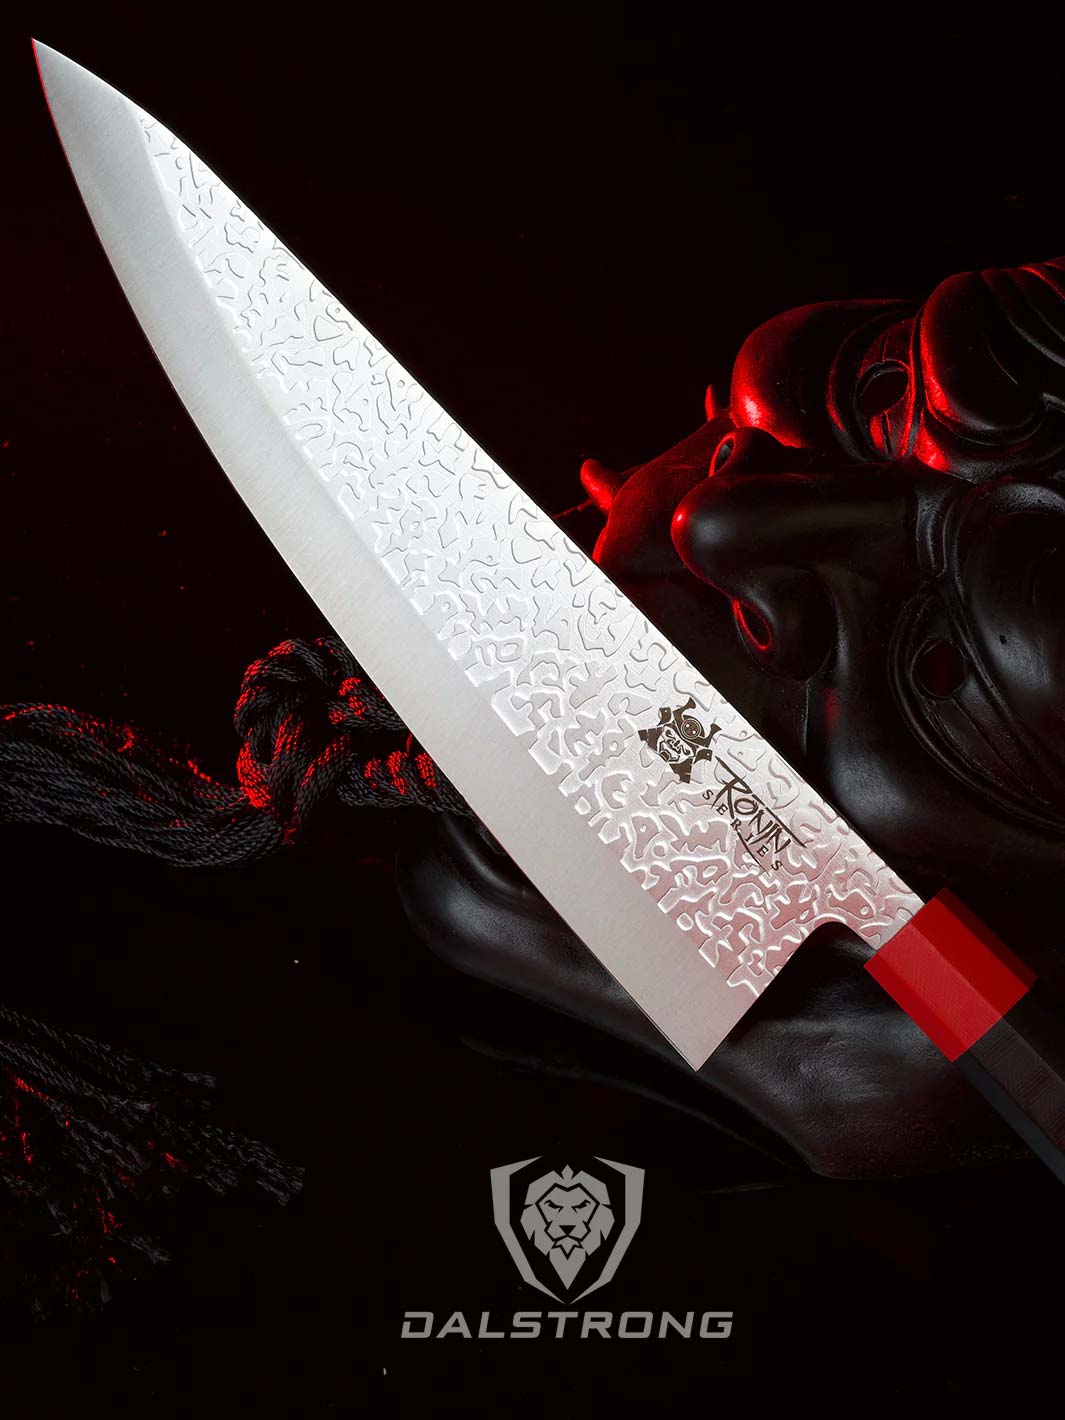 Dalstrong ronin series 9.5 inch chef knife with black handle and a oni mask.